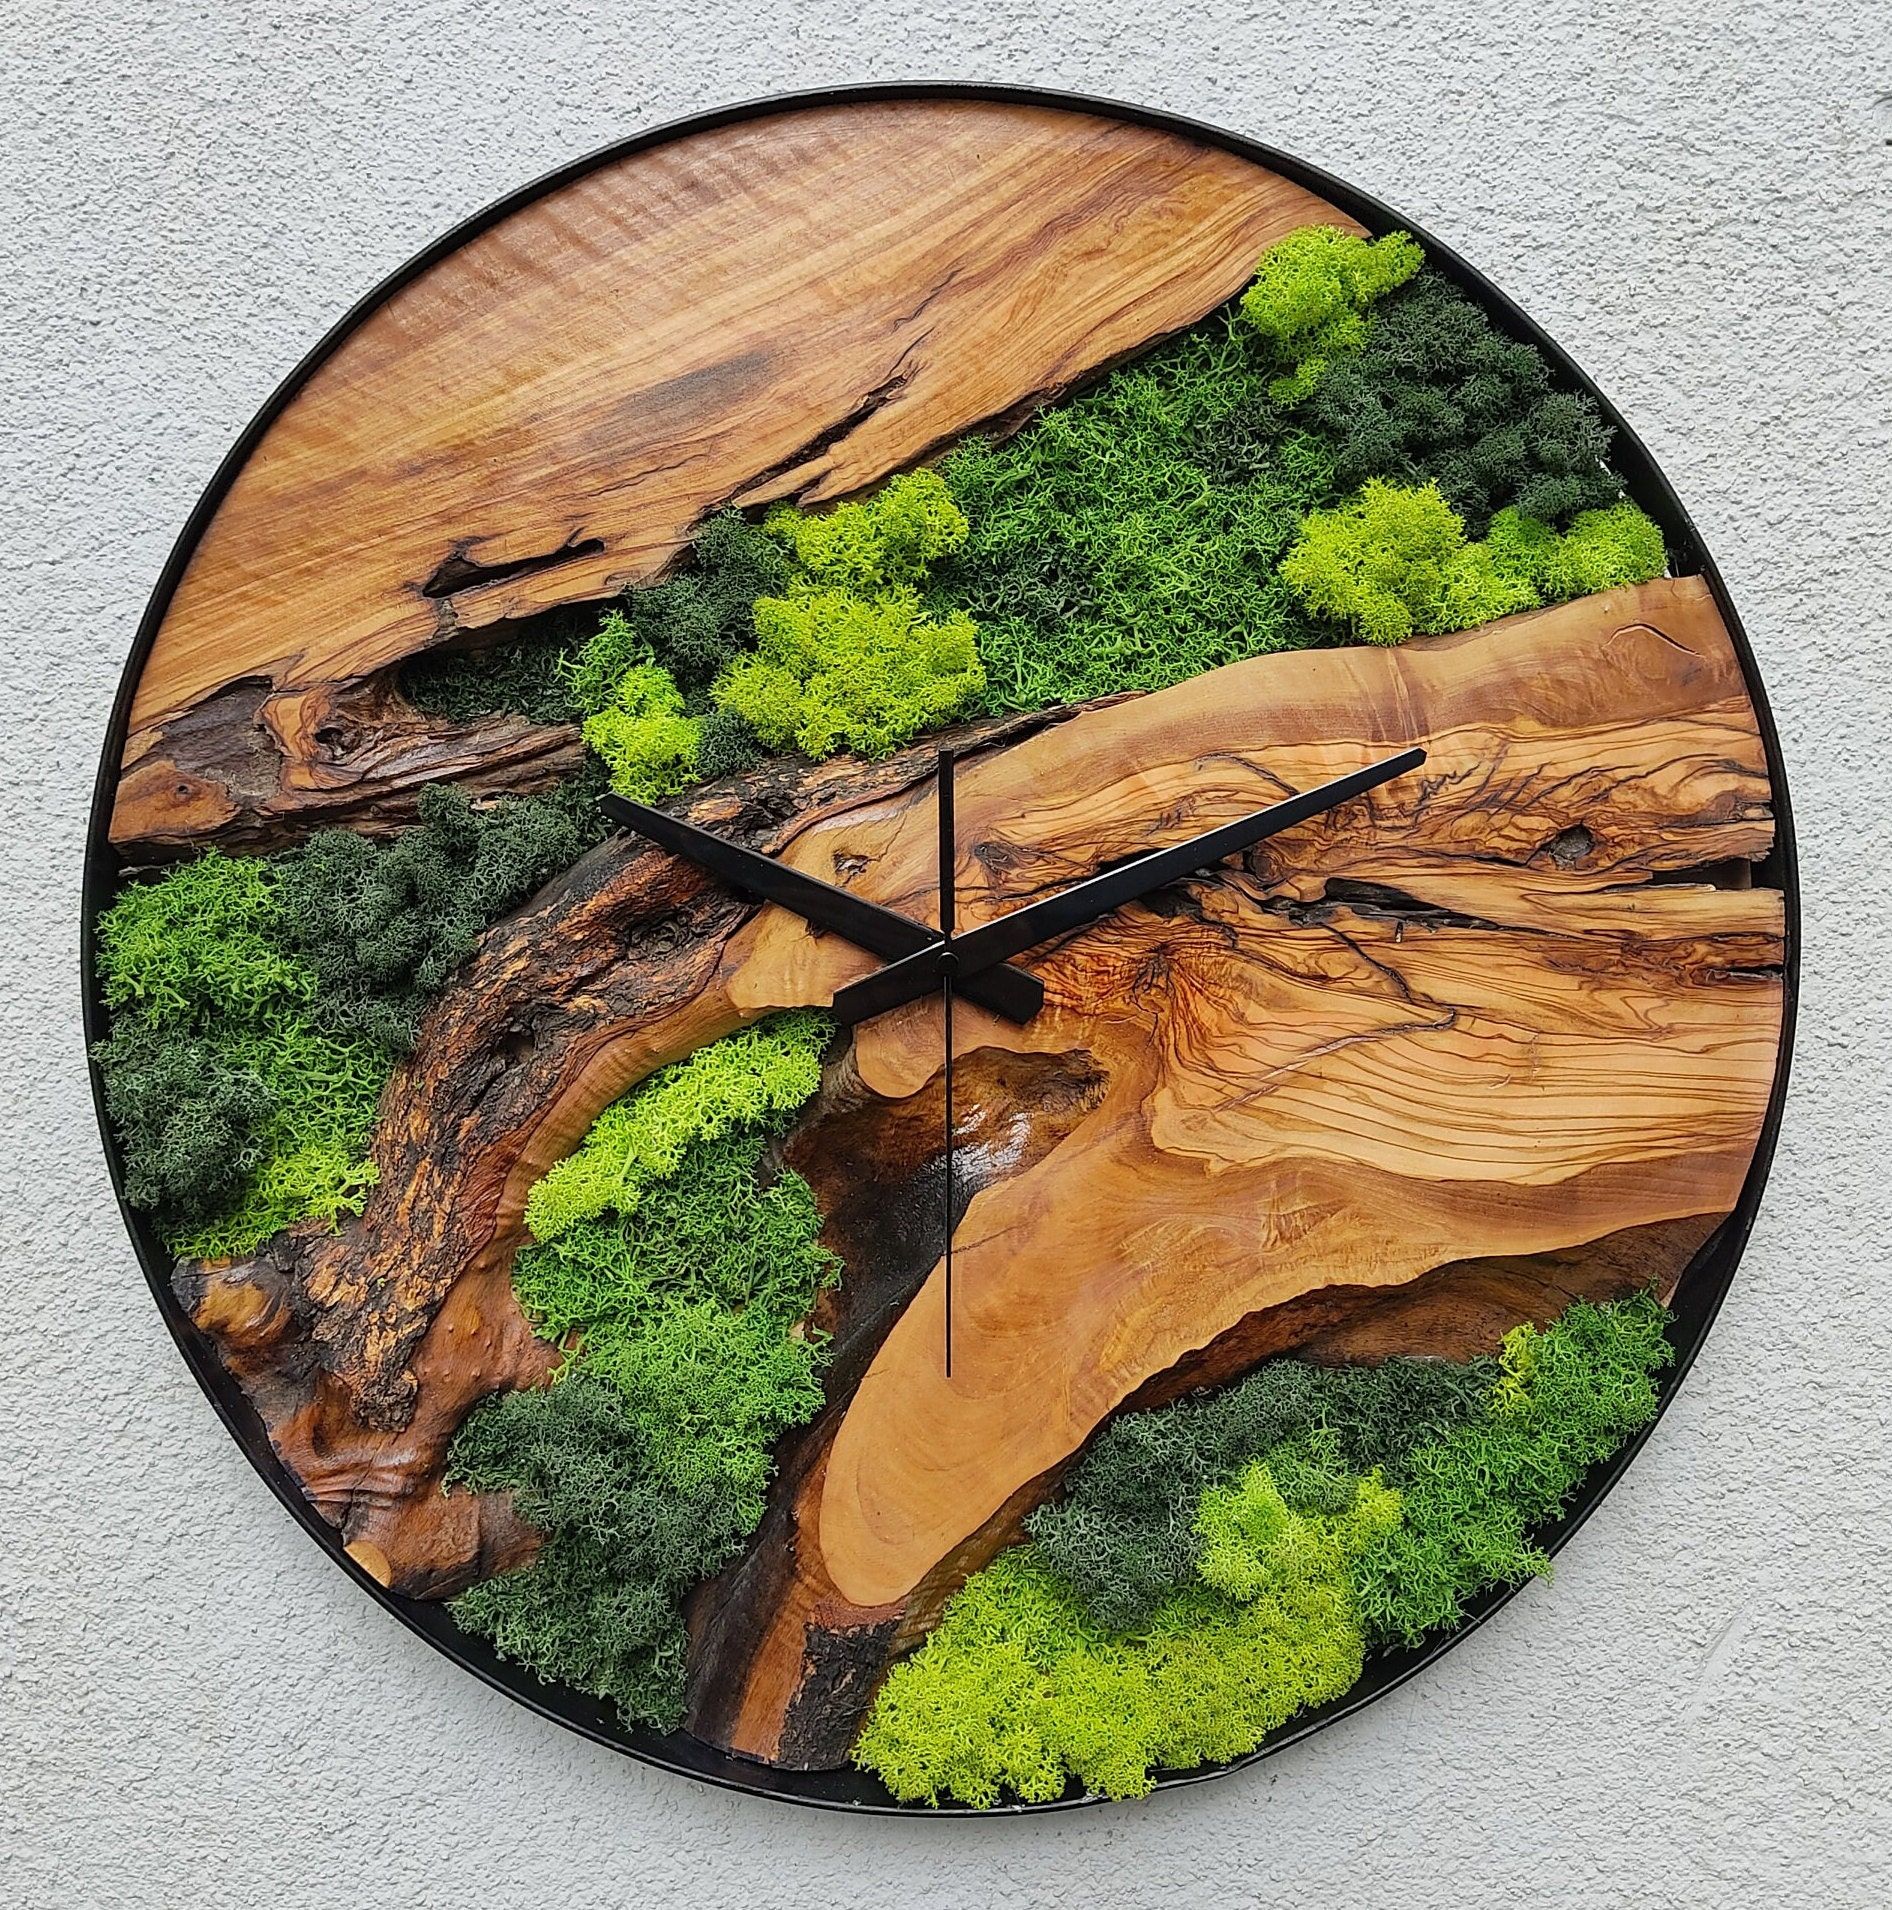 Timeless Decor: Adorn Your Walls with Home Wall Clocks